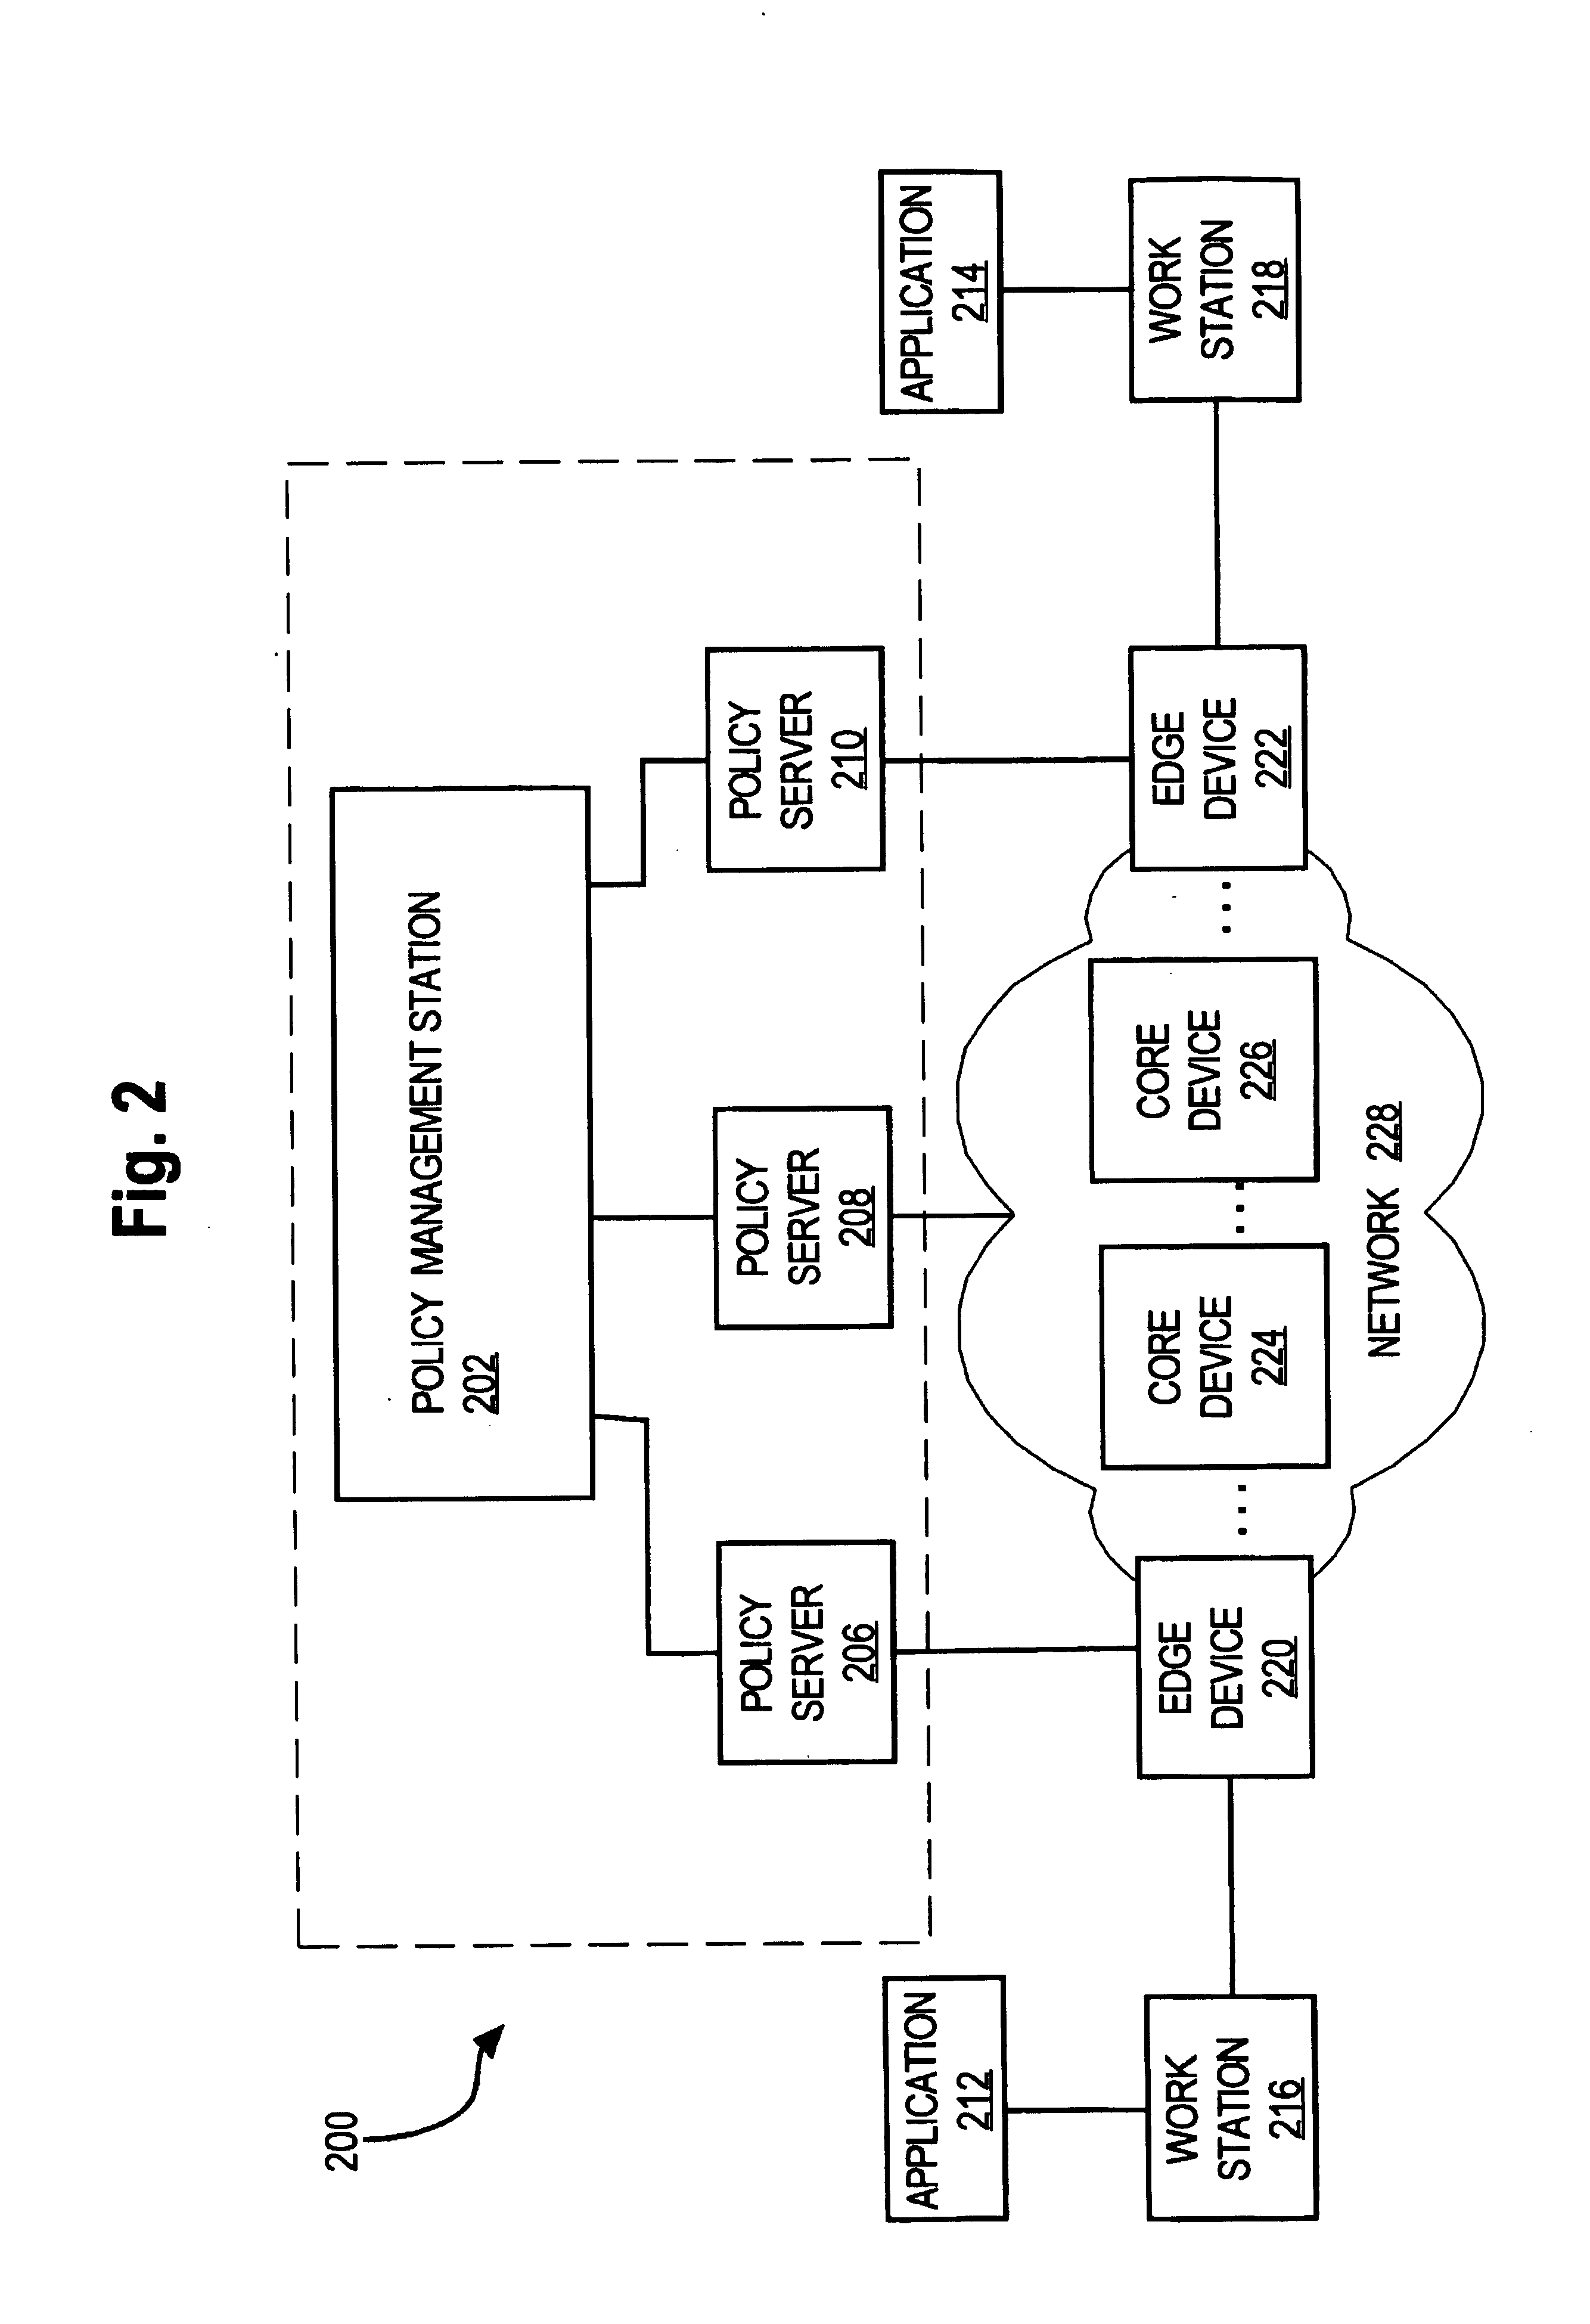 Method and apparatus for automatically establishing bi-directional differentiated services treatment of flows in a network